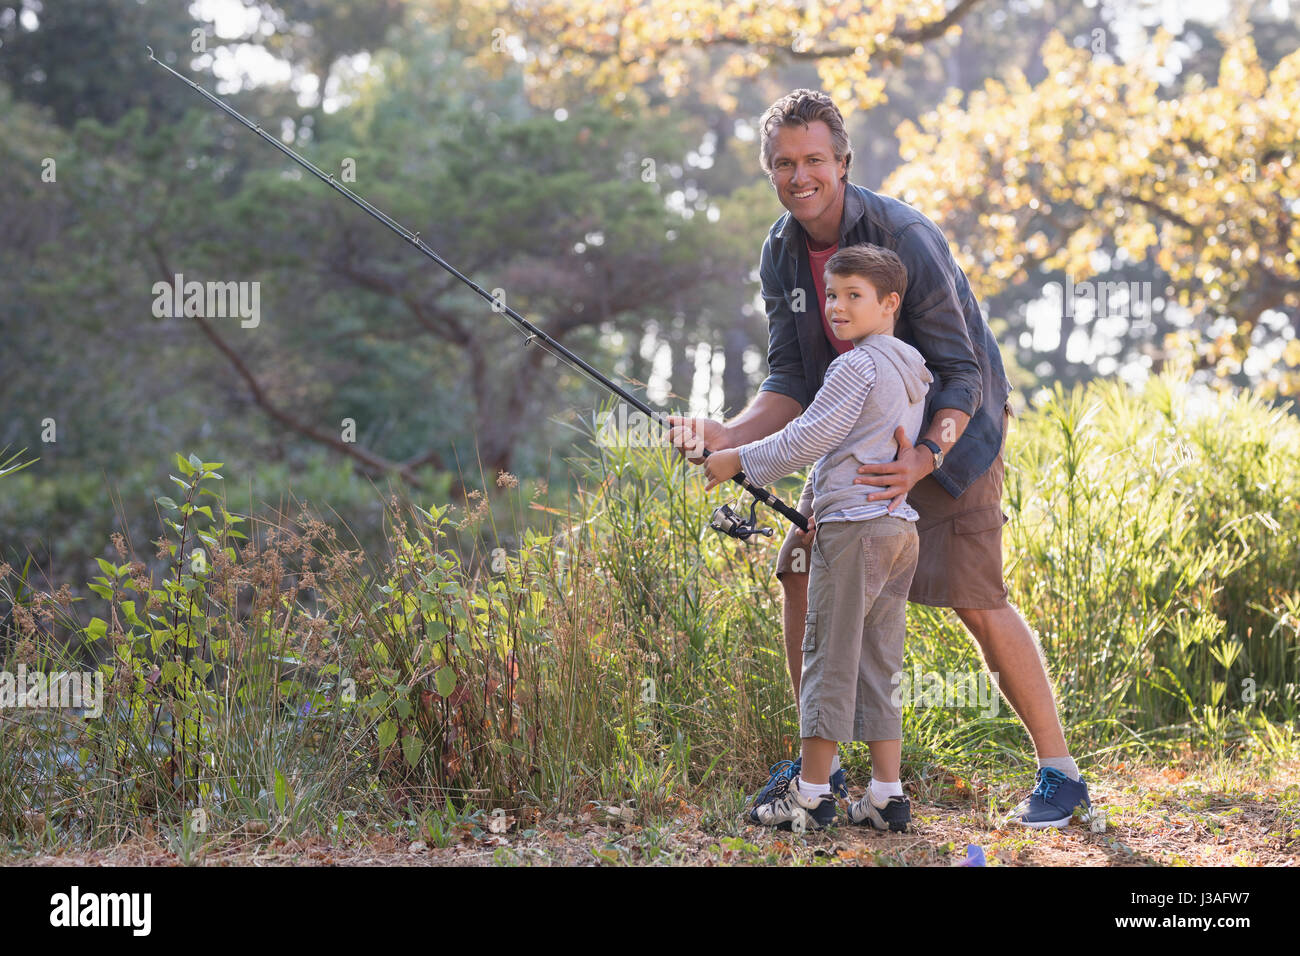 https://c8.alamy.com/comp/J3AFW7/portait-of-father-and-son-fishing-by-plants-in-forest-J3AFW7.jpg